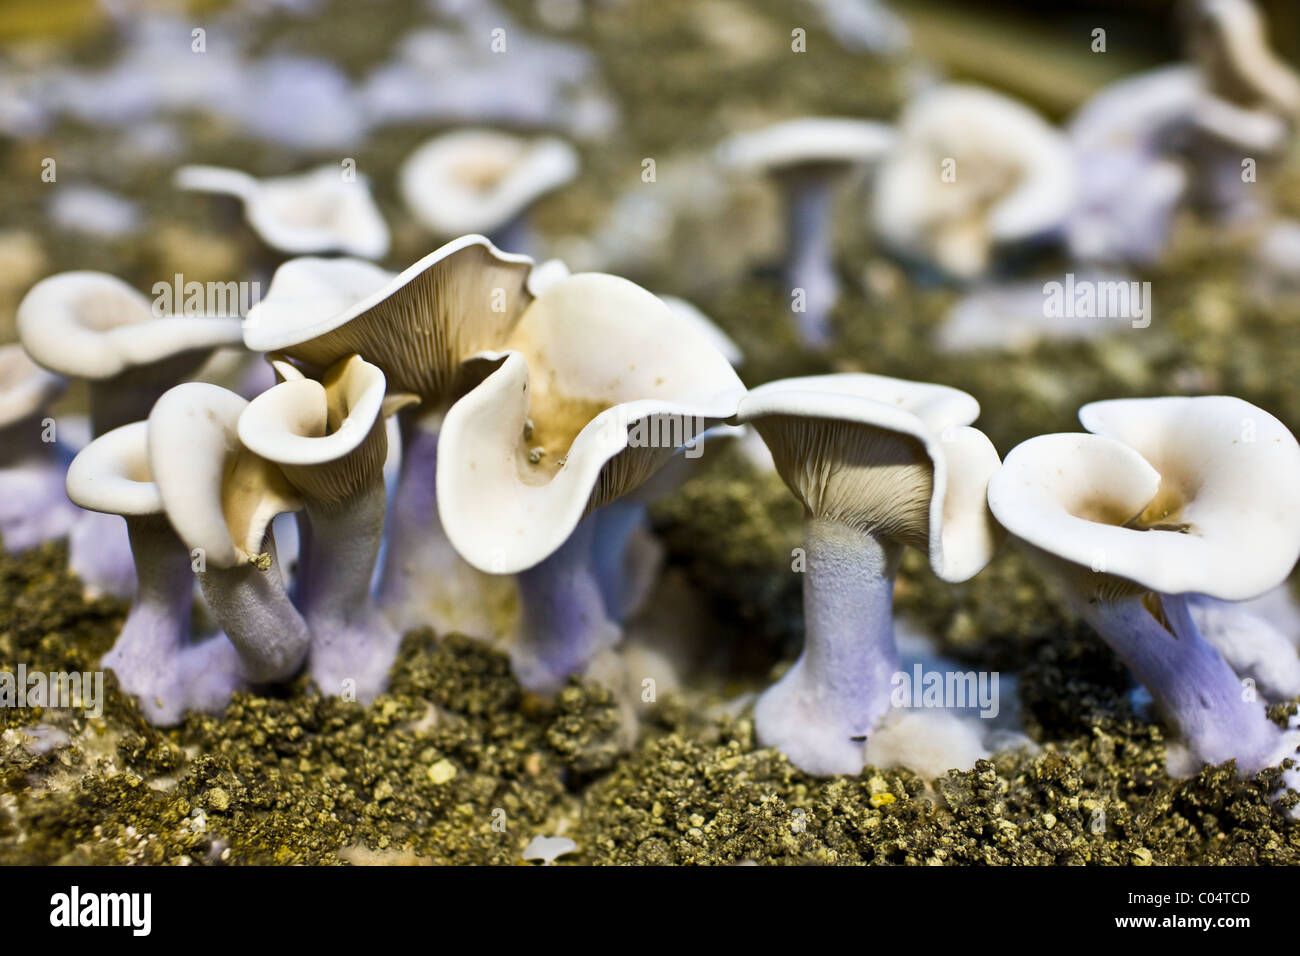 Wood blewit, Lepista nuda, mushrooms growing underground in compost in cave in the Loire Valley, France Stock Photo